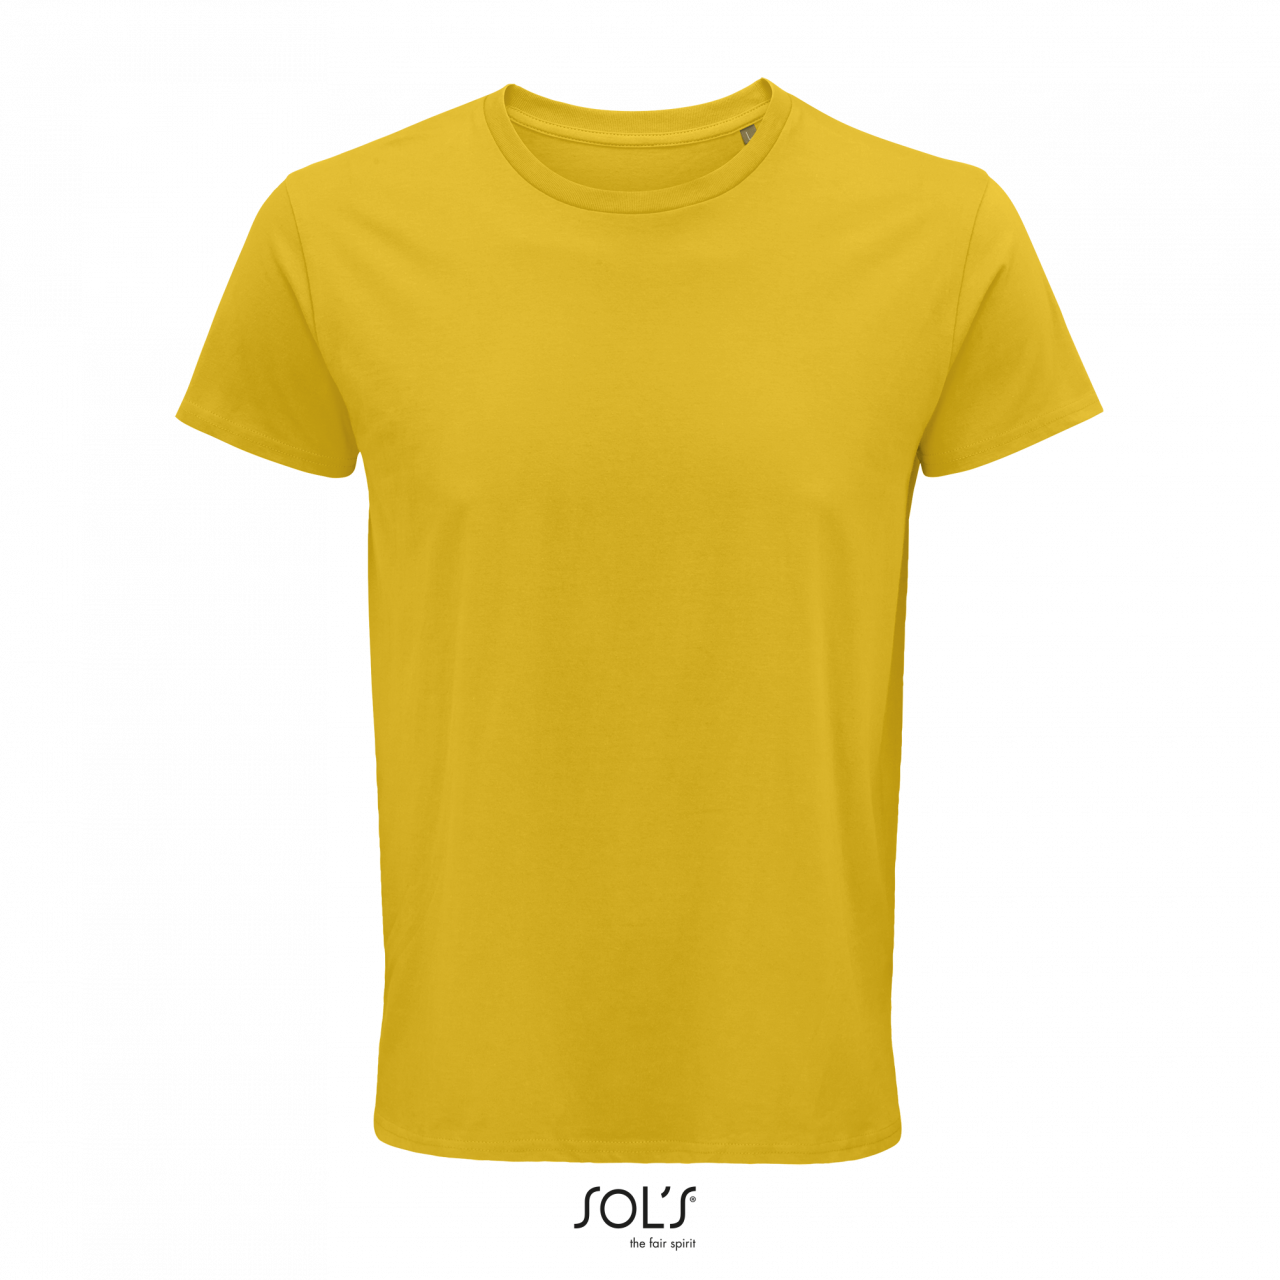 Sol's Crusader Men - Round-neck Fitted Jersey T-shirt - Sol's Crusader Men - Round-neck Fitted Jersey T-shirt - Gold